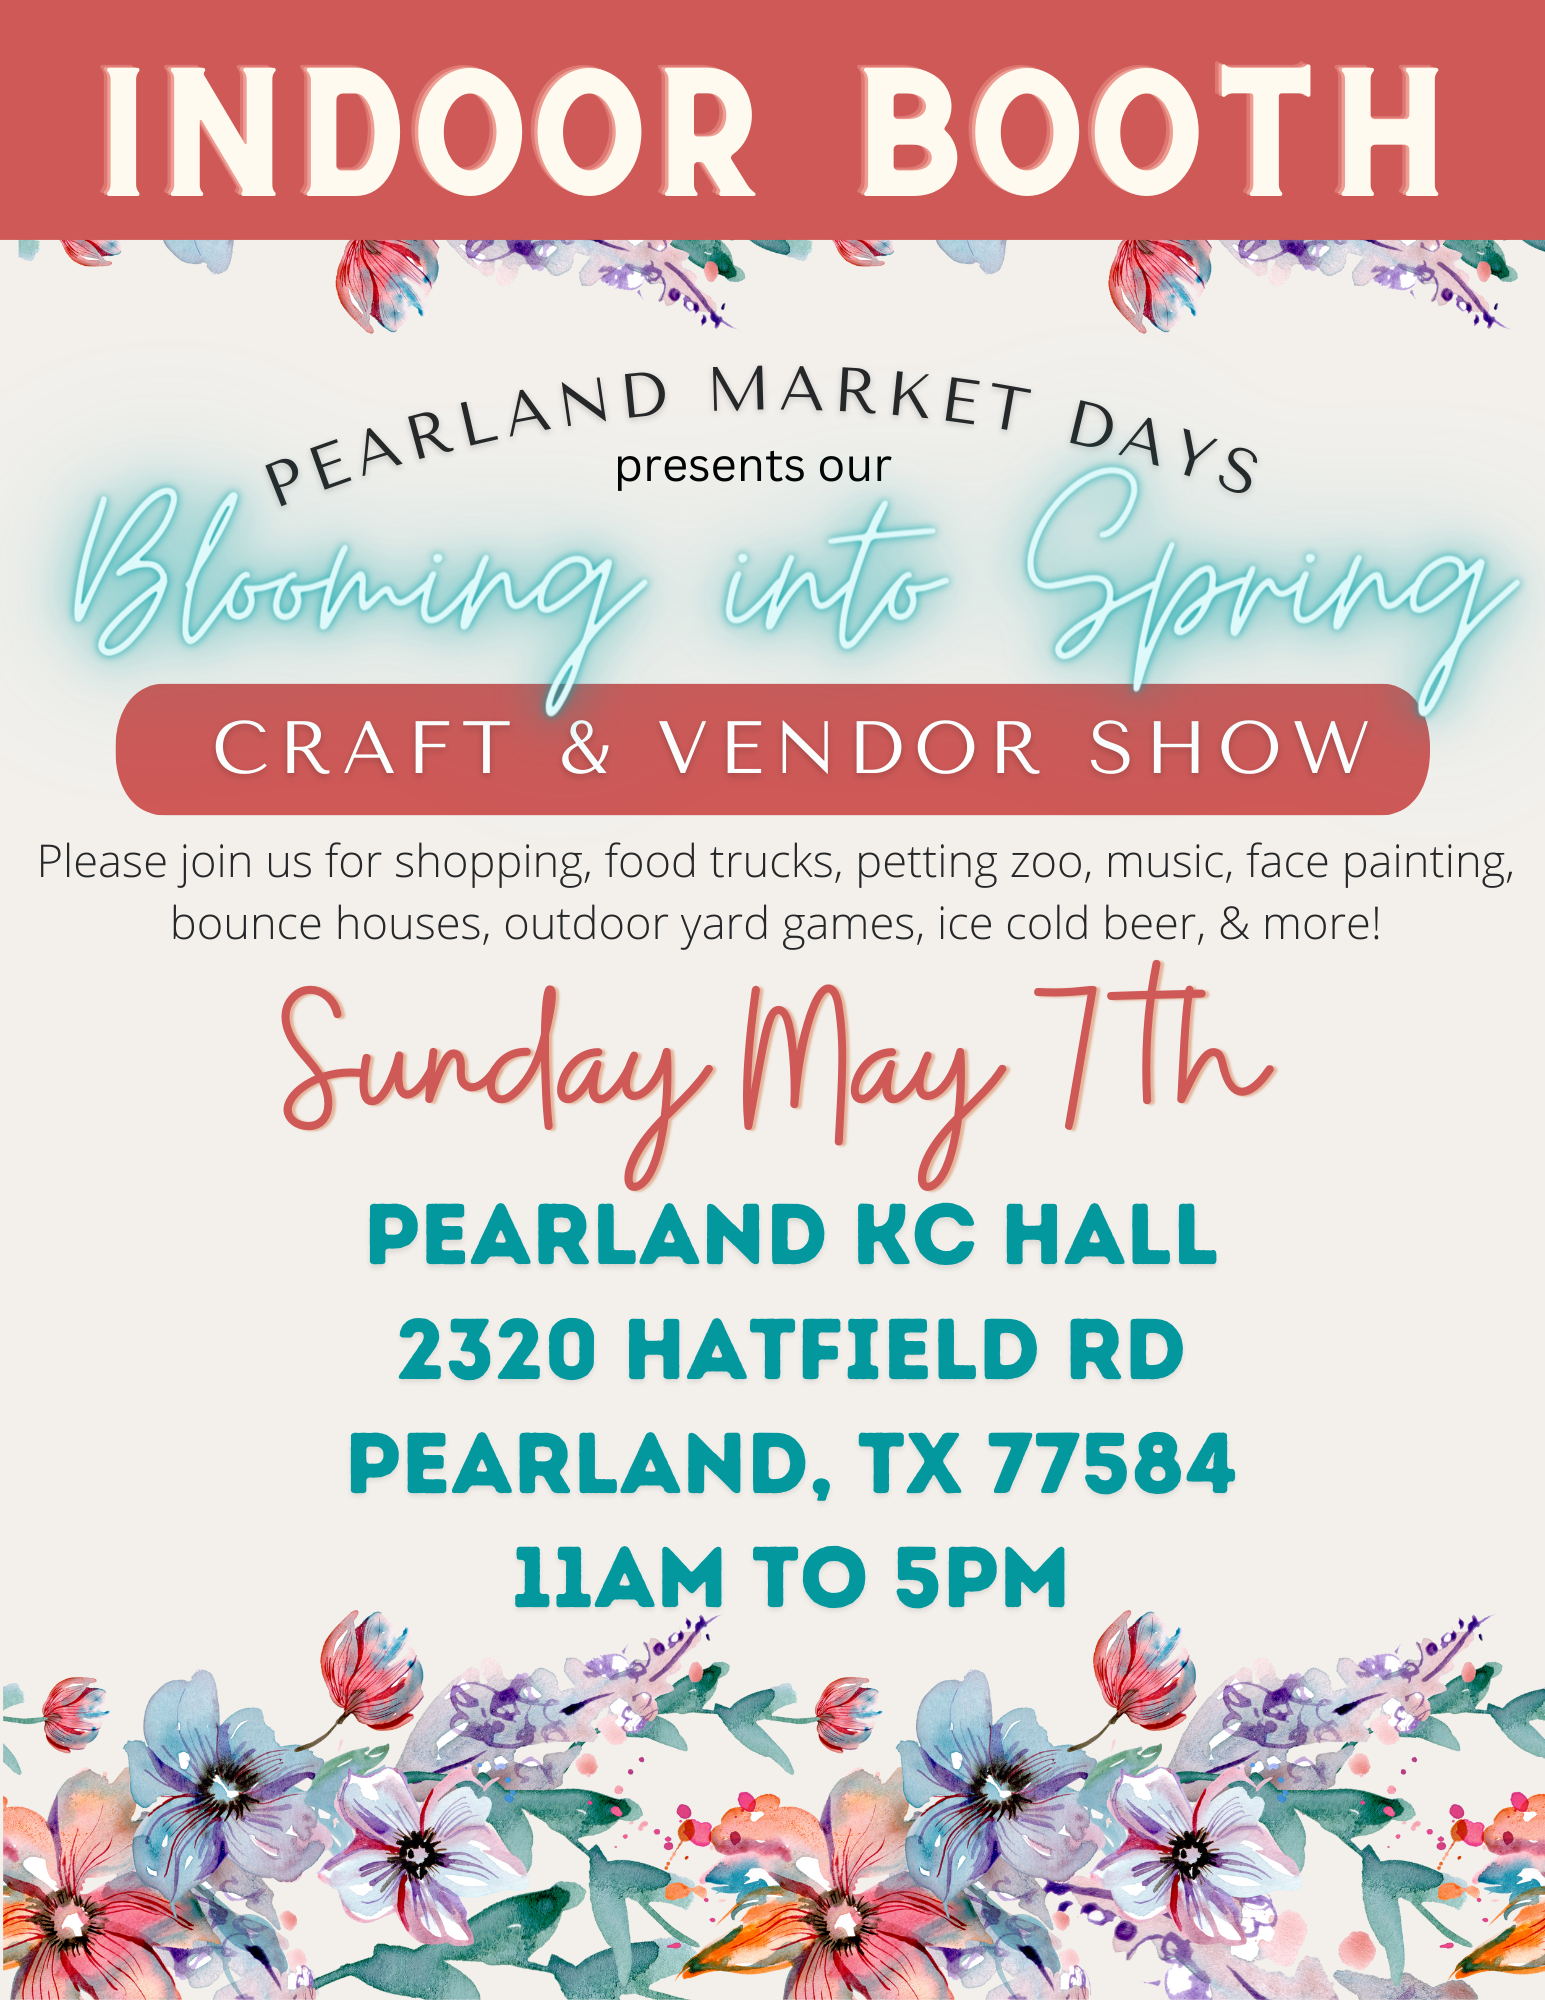 PEARLAND Sunday May 7, 2023 - INDOOR BOOTH